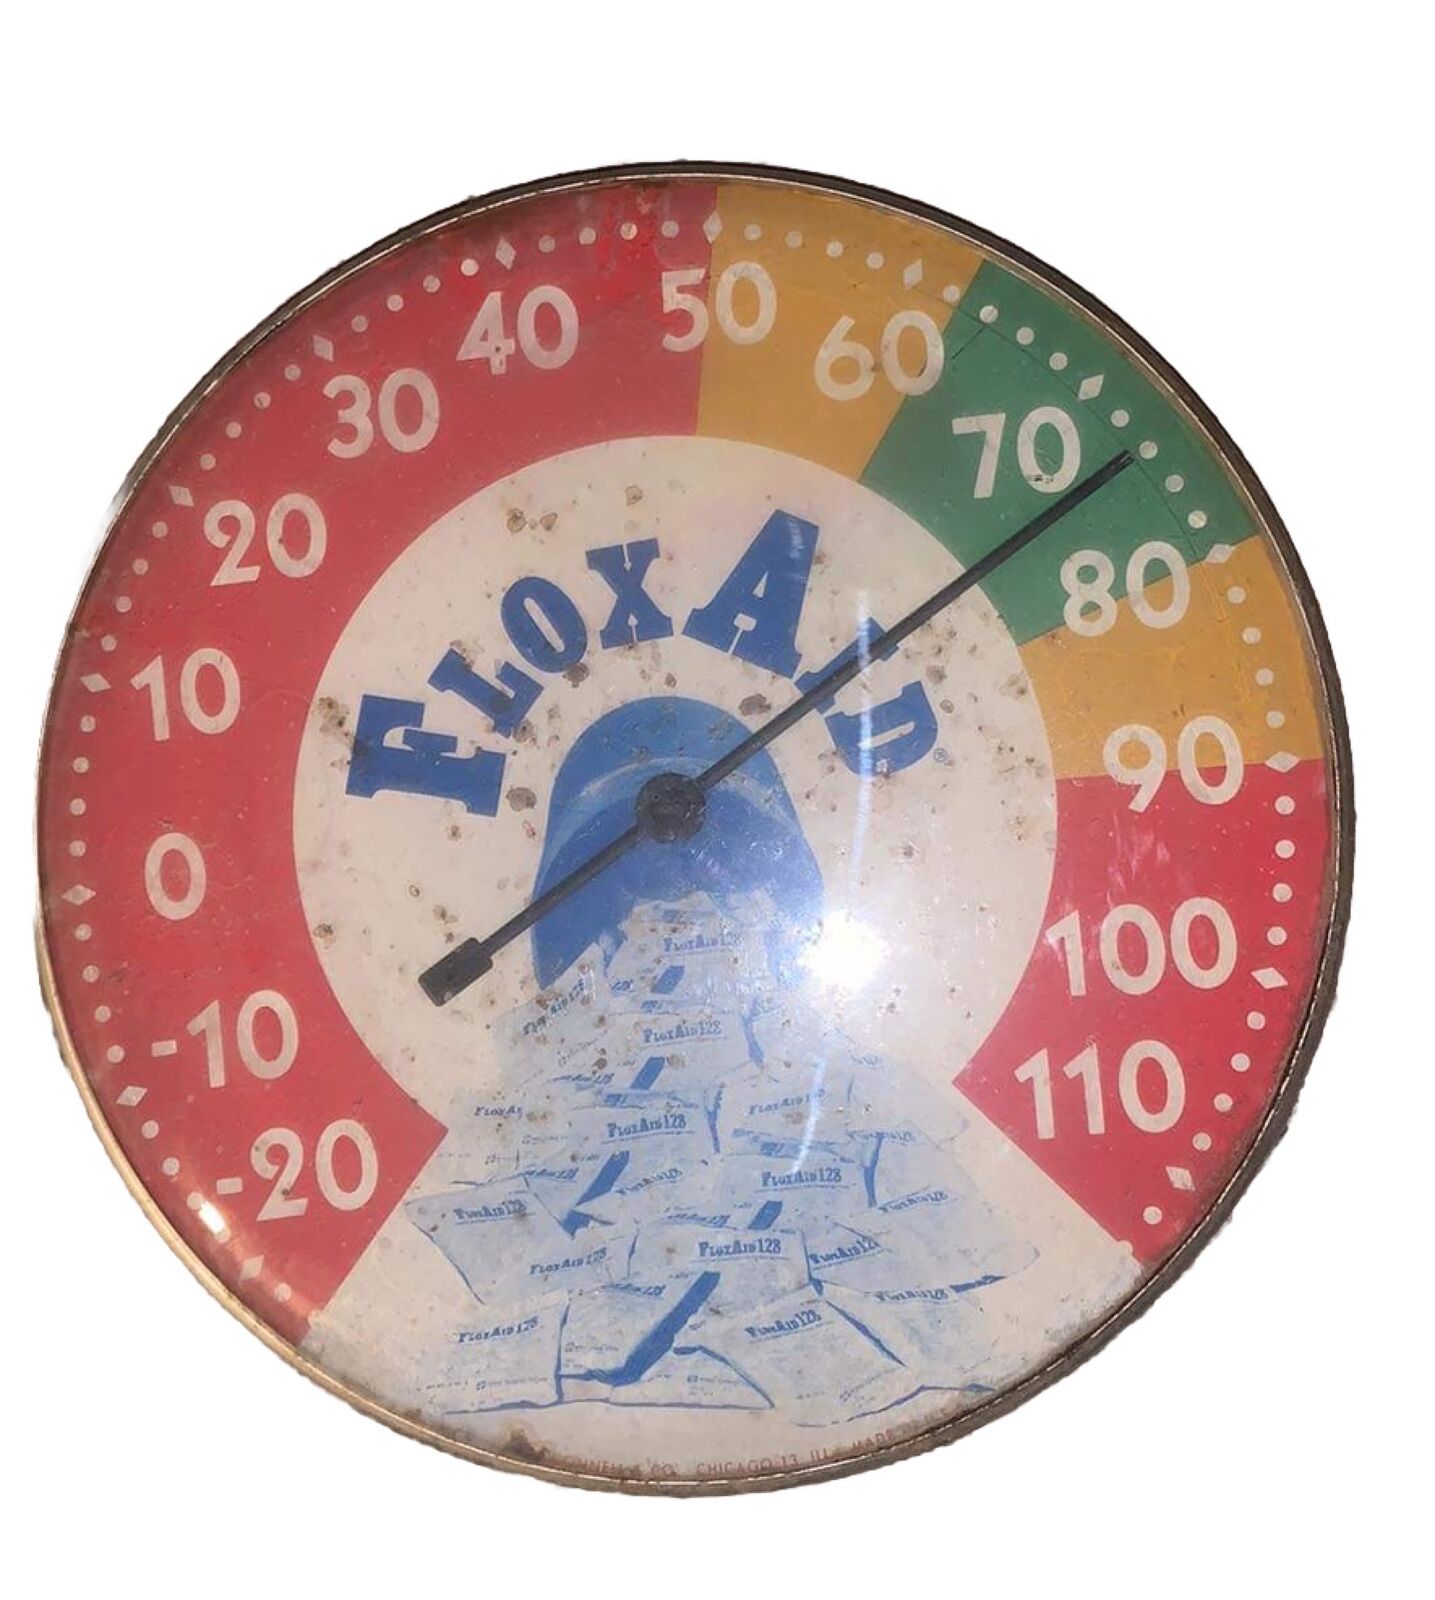 Flox Aid Poultry Chicken Farm Advertising Thermometer 10\